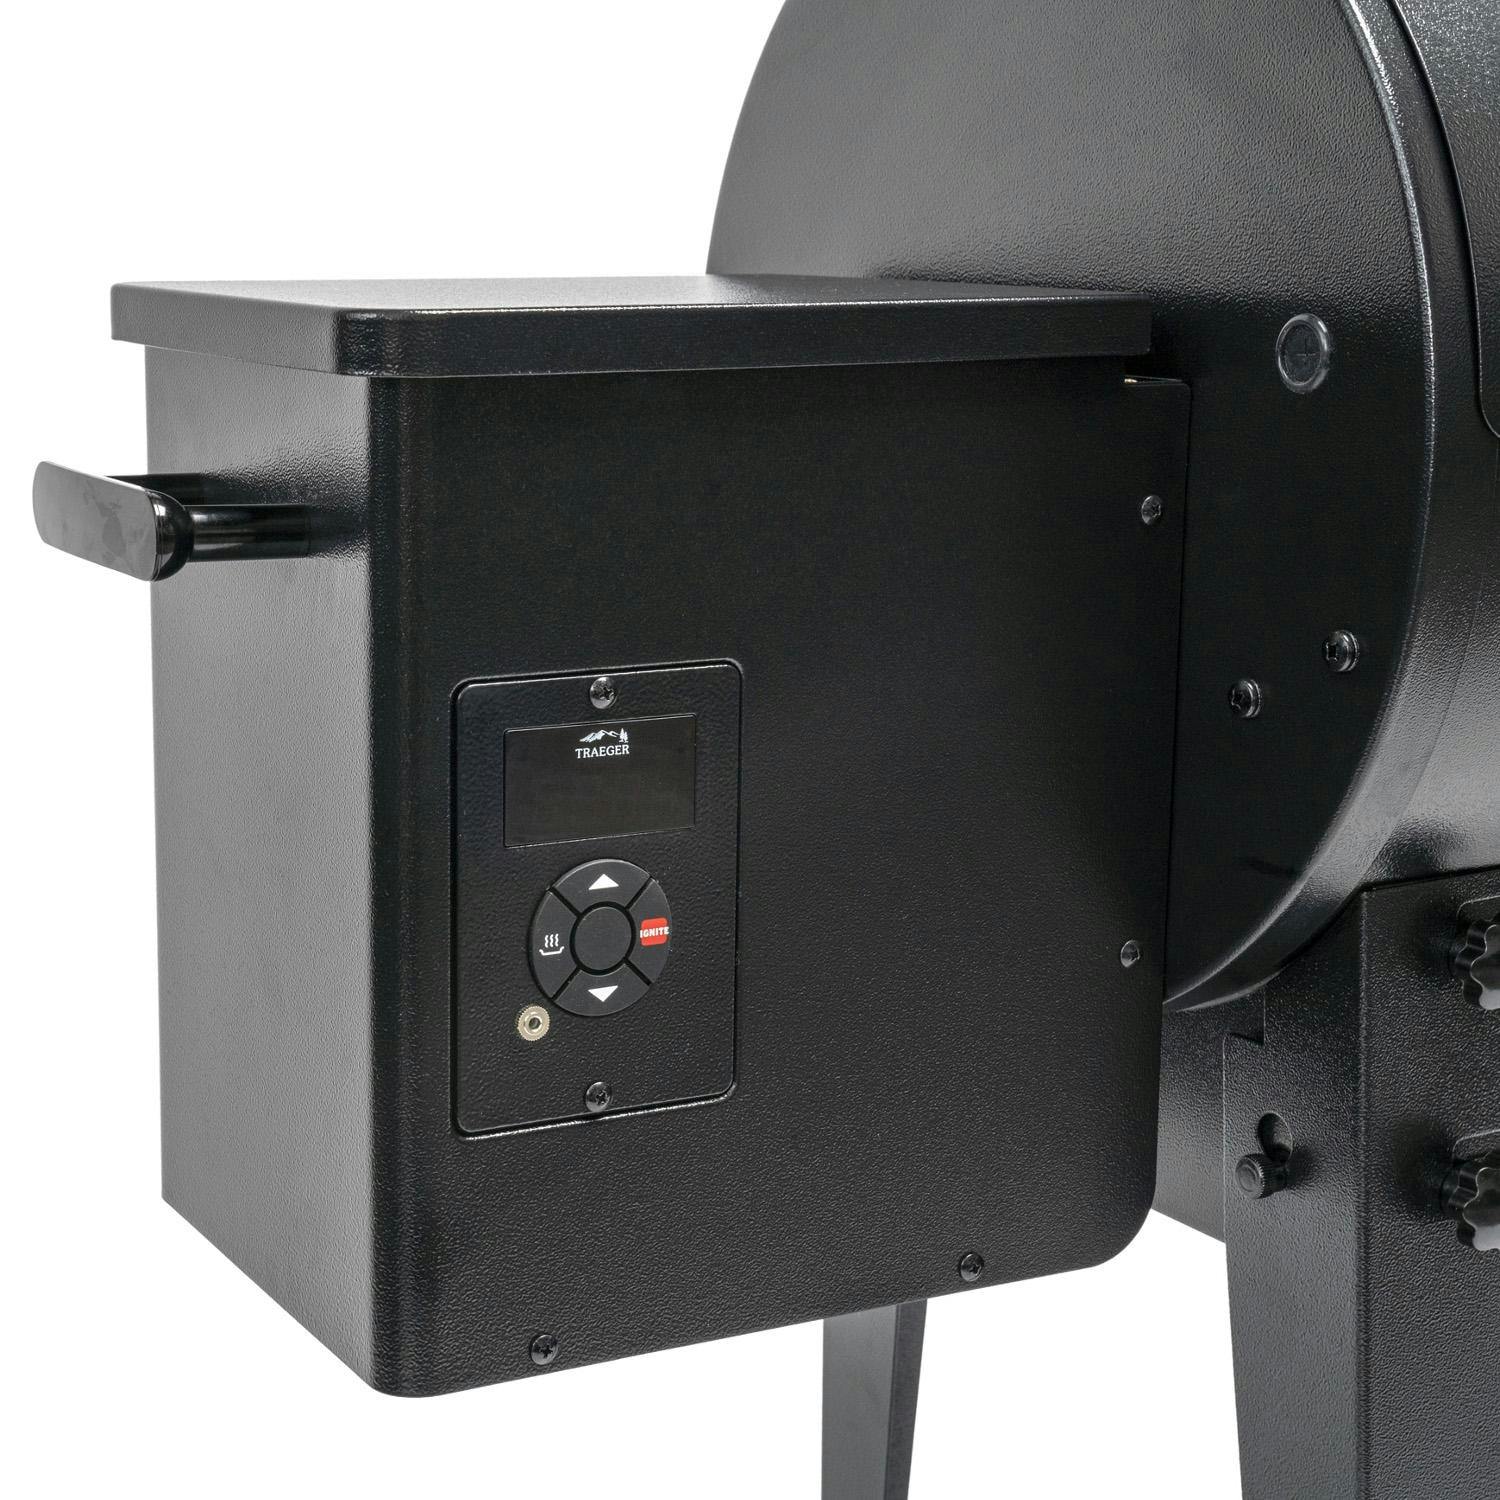 Traeger Tailgater 20 Portable Wood Pellet Grill · 37 in.